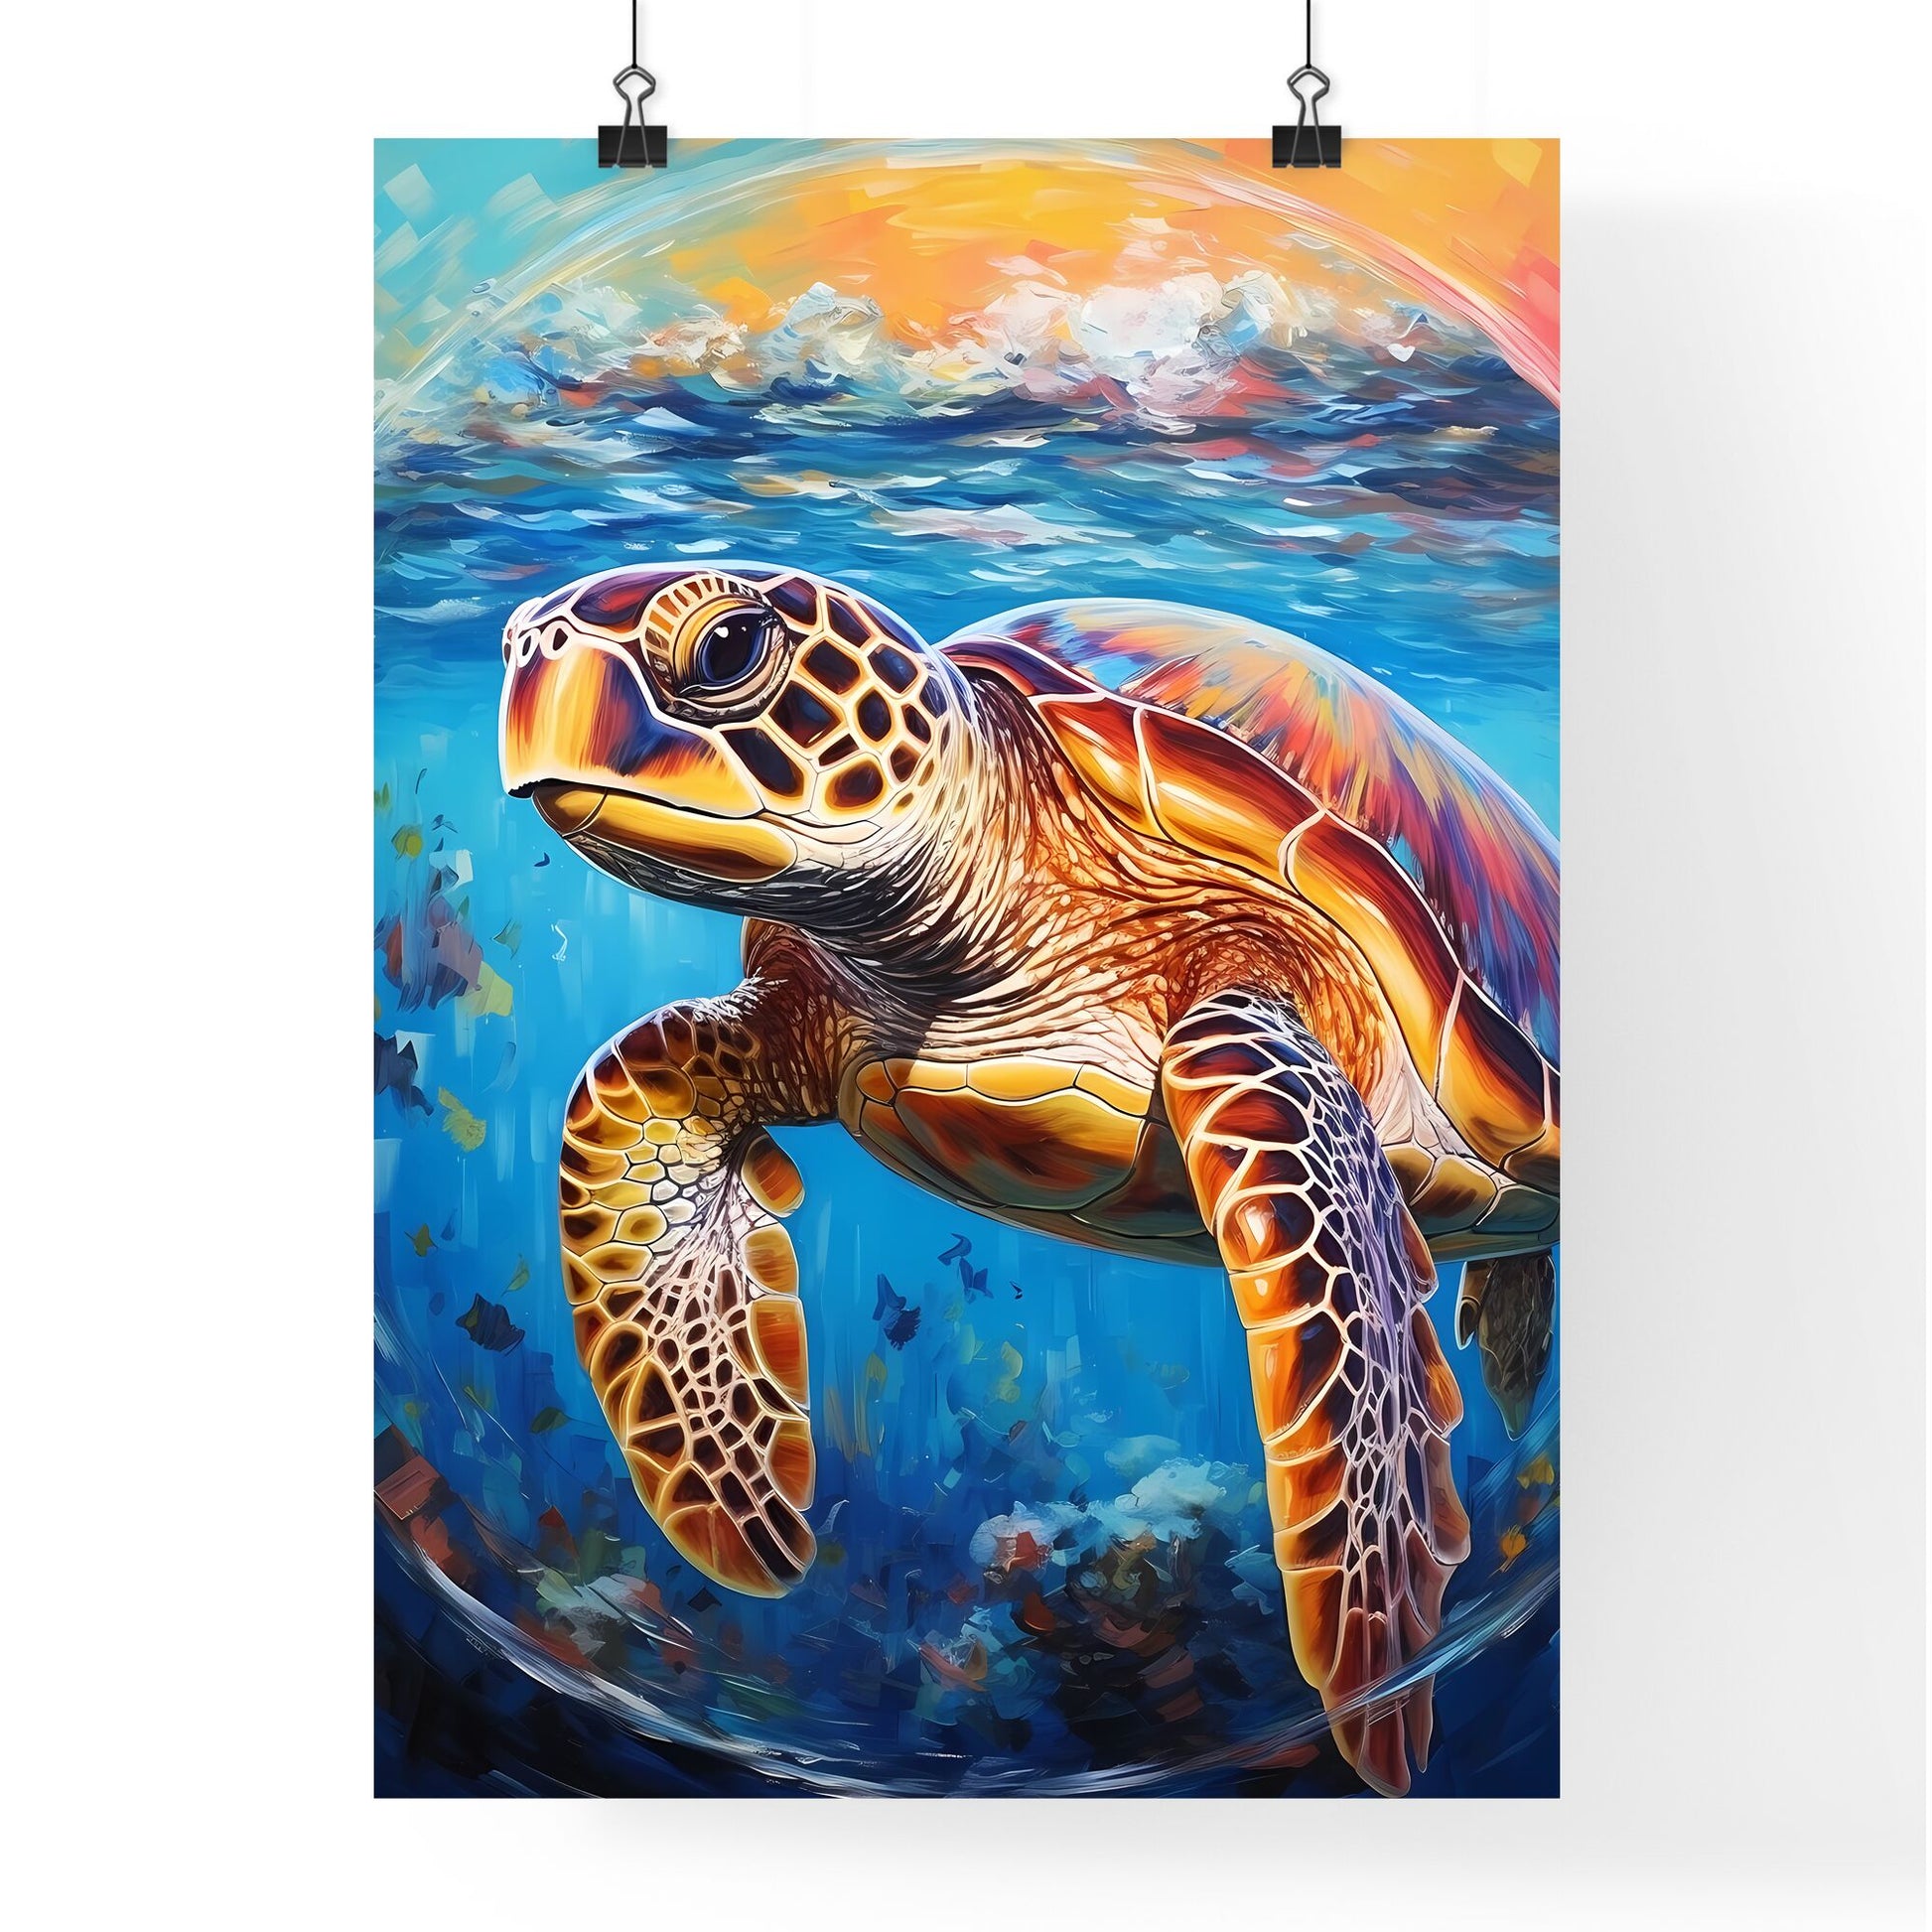 View Of Nice Sea Turtle Flying Down To The Ocean - A Sea Turtle Swimming In Water Default Title